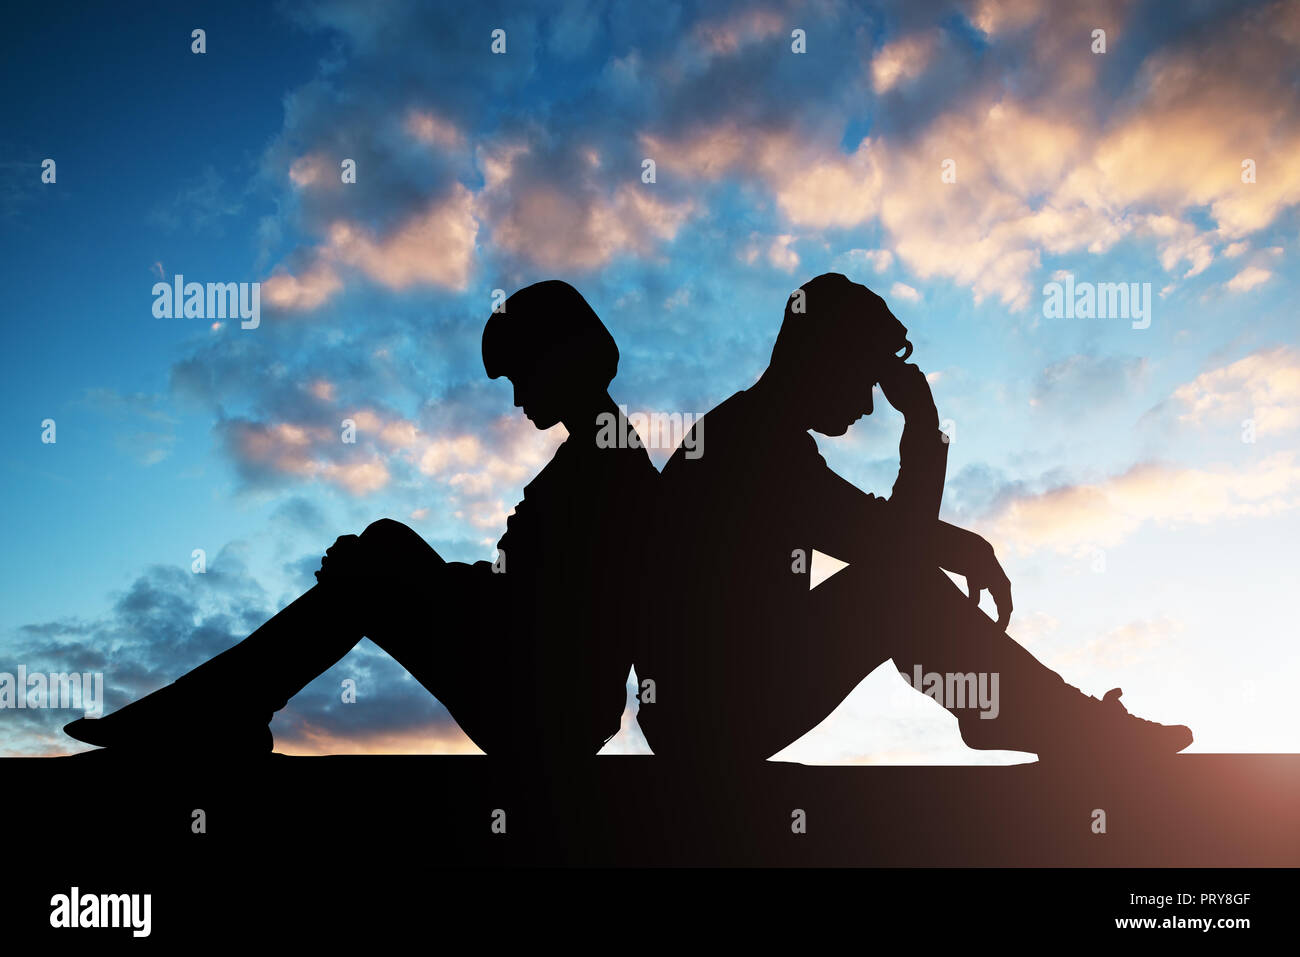 Silhouette Of Sad Couple Sitting Back To Back Against Cloudy Sky Stock Photo